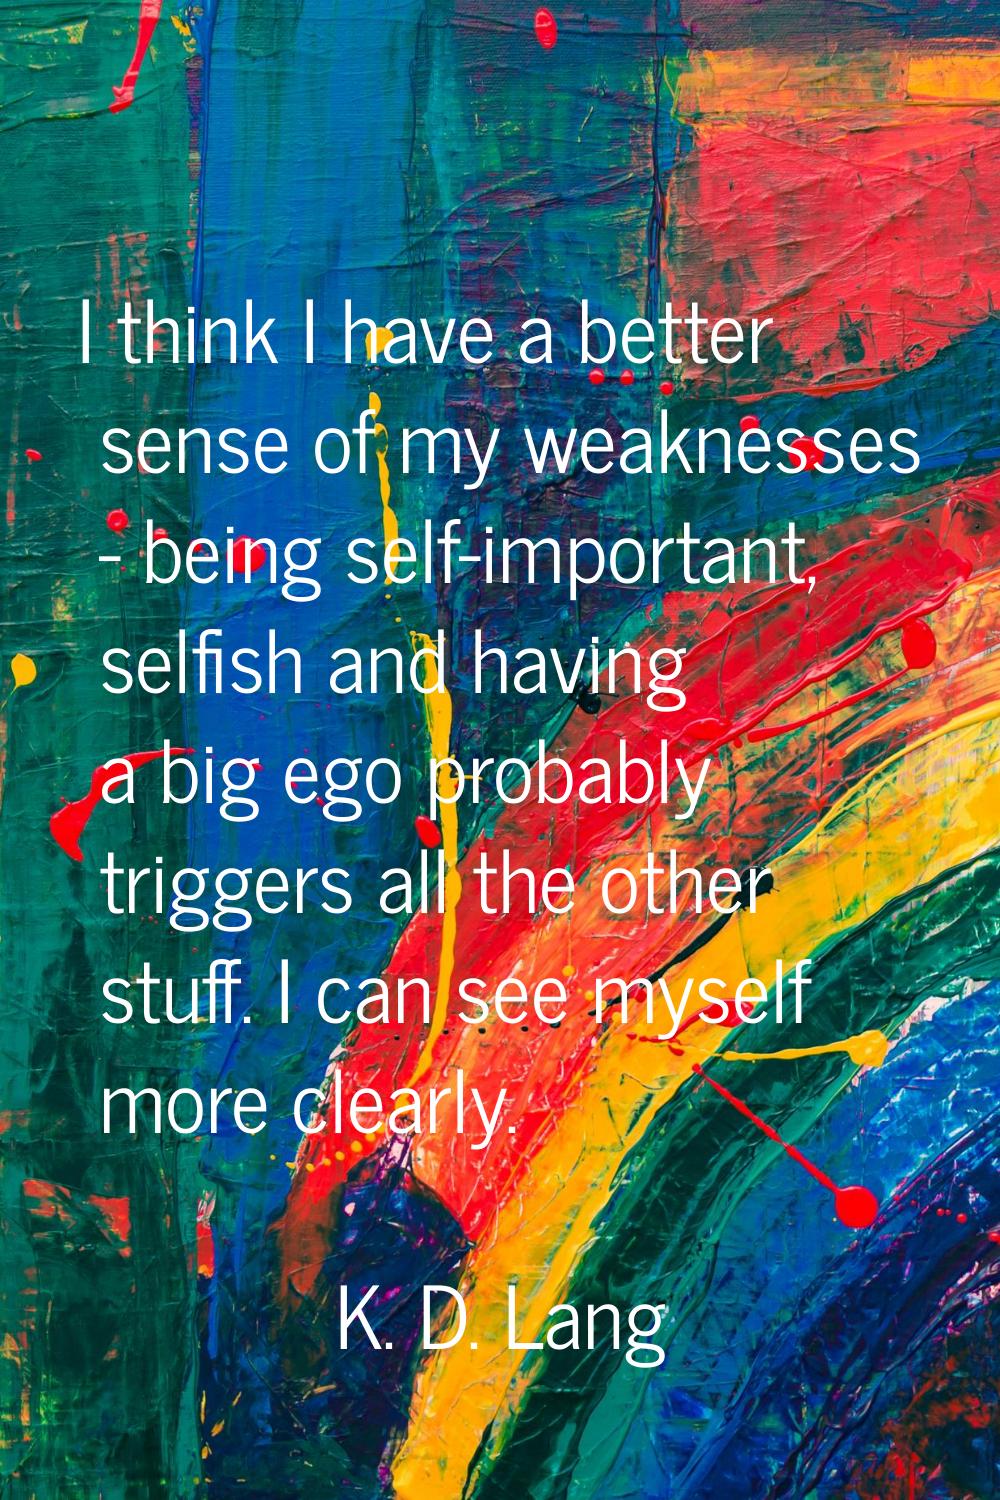 I think I have a better sense of my weaknesses - being self-important, selfish and having a big ego